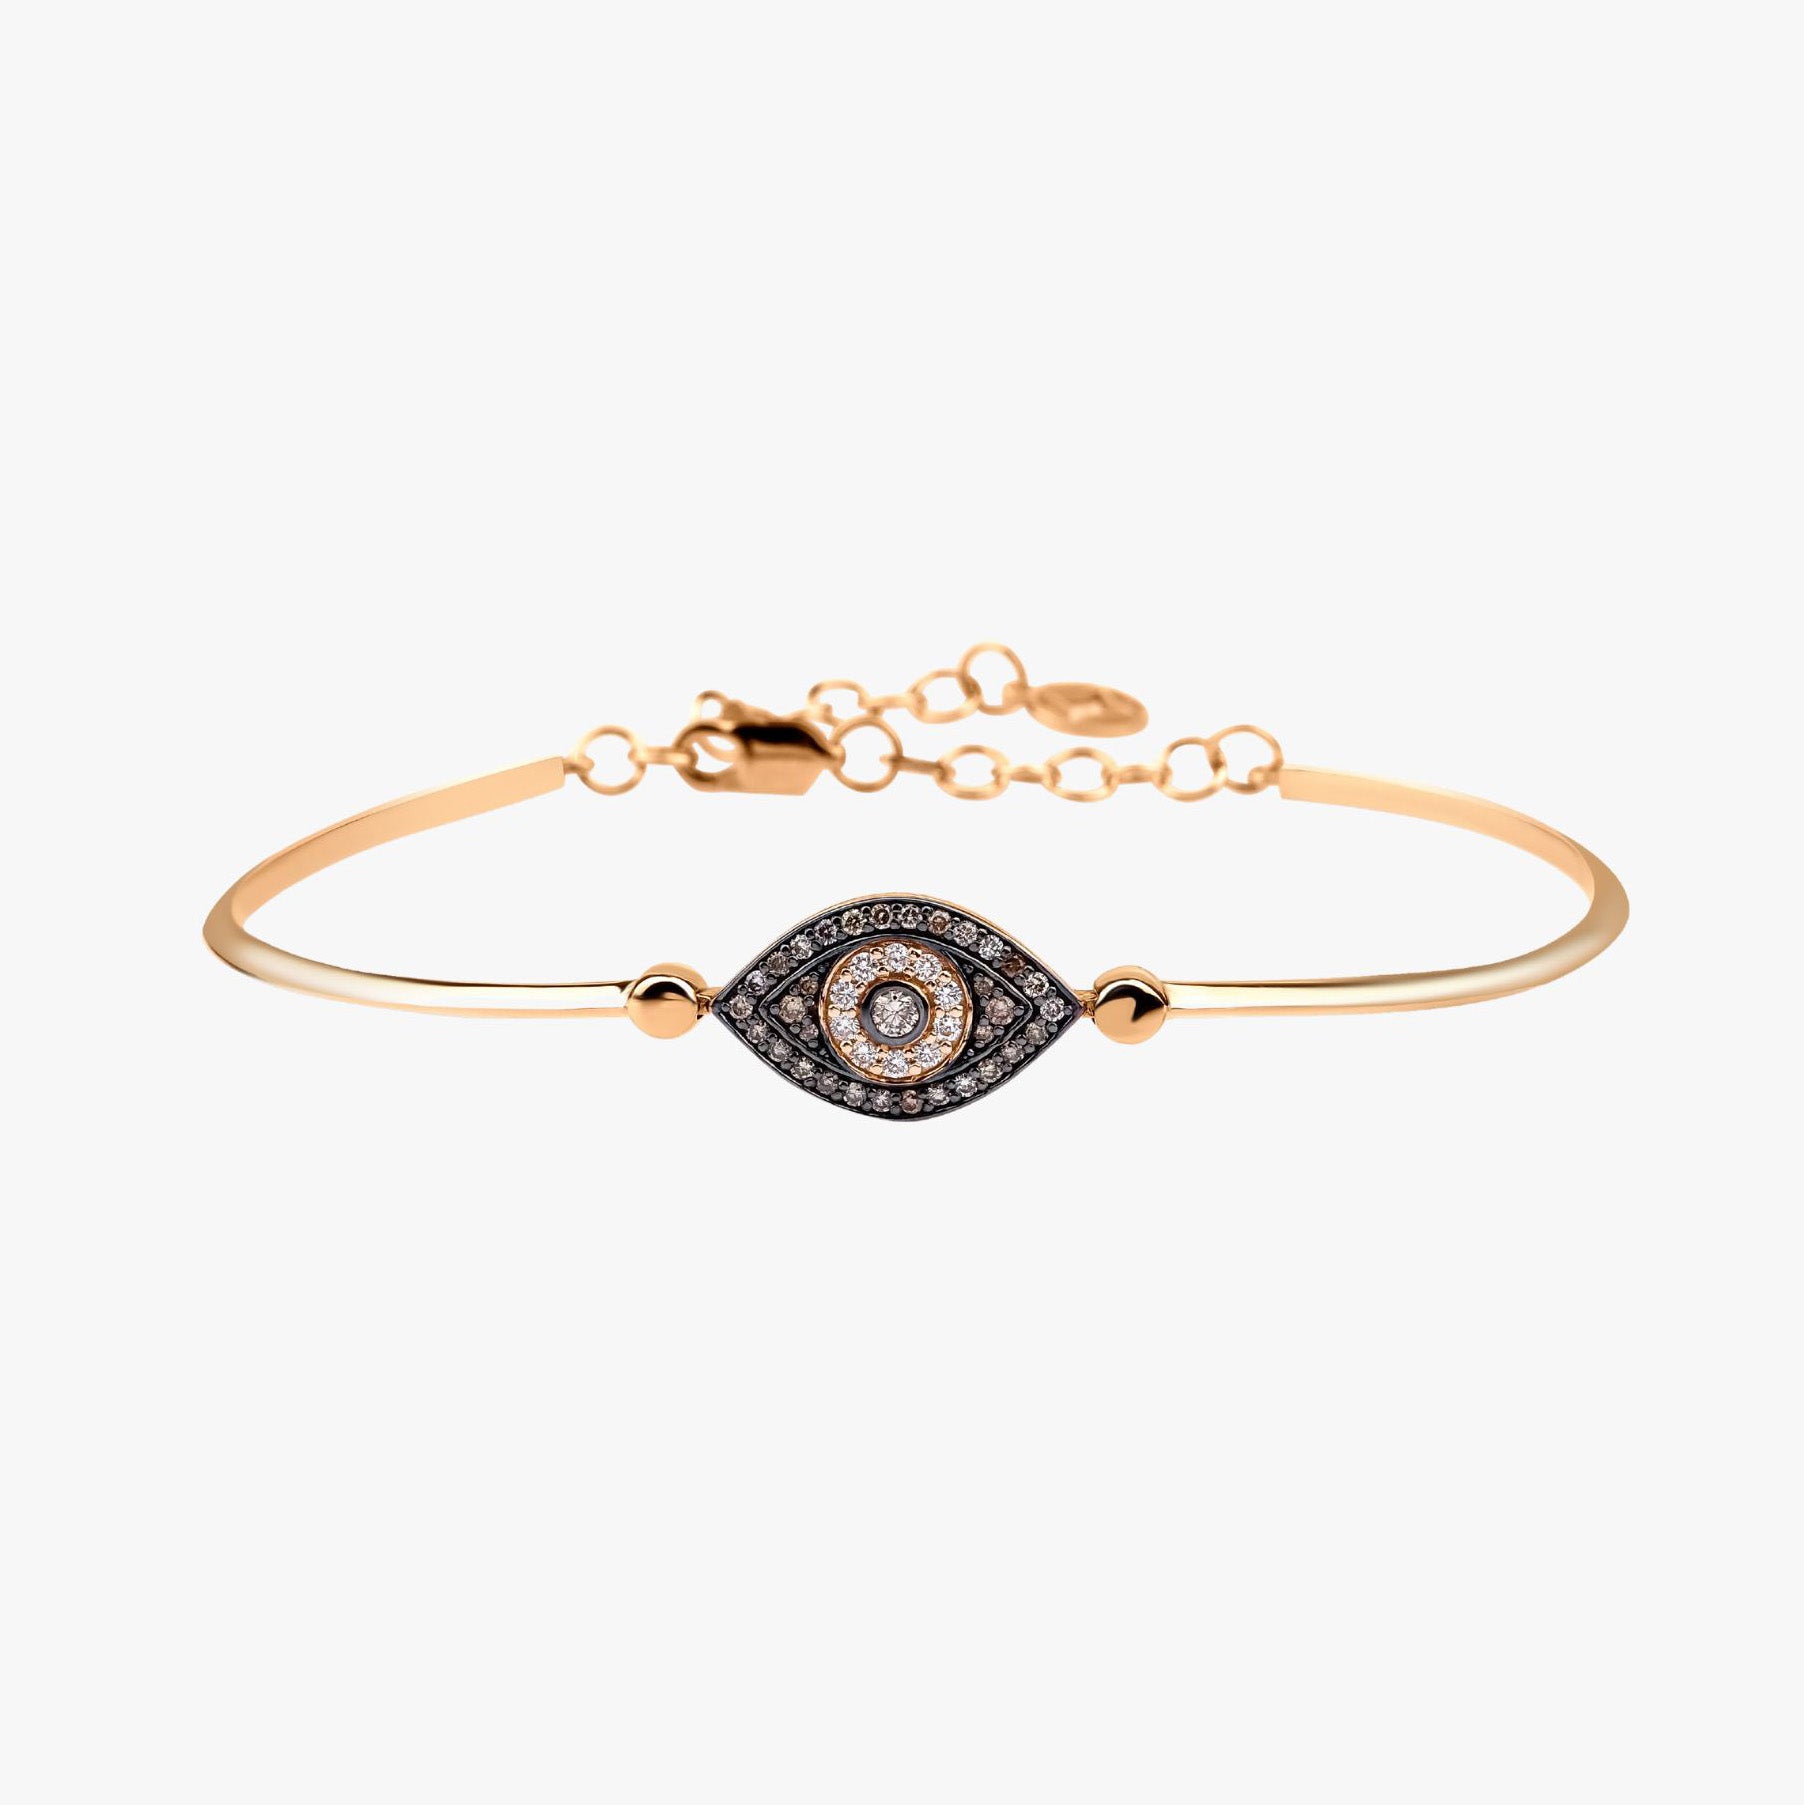 White and Chocolate Diamond Evil Eye Bracelet Available in 14K and 18K Gold